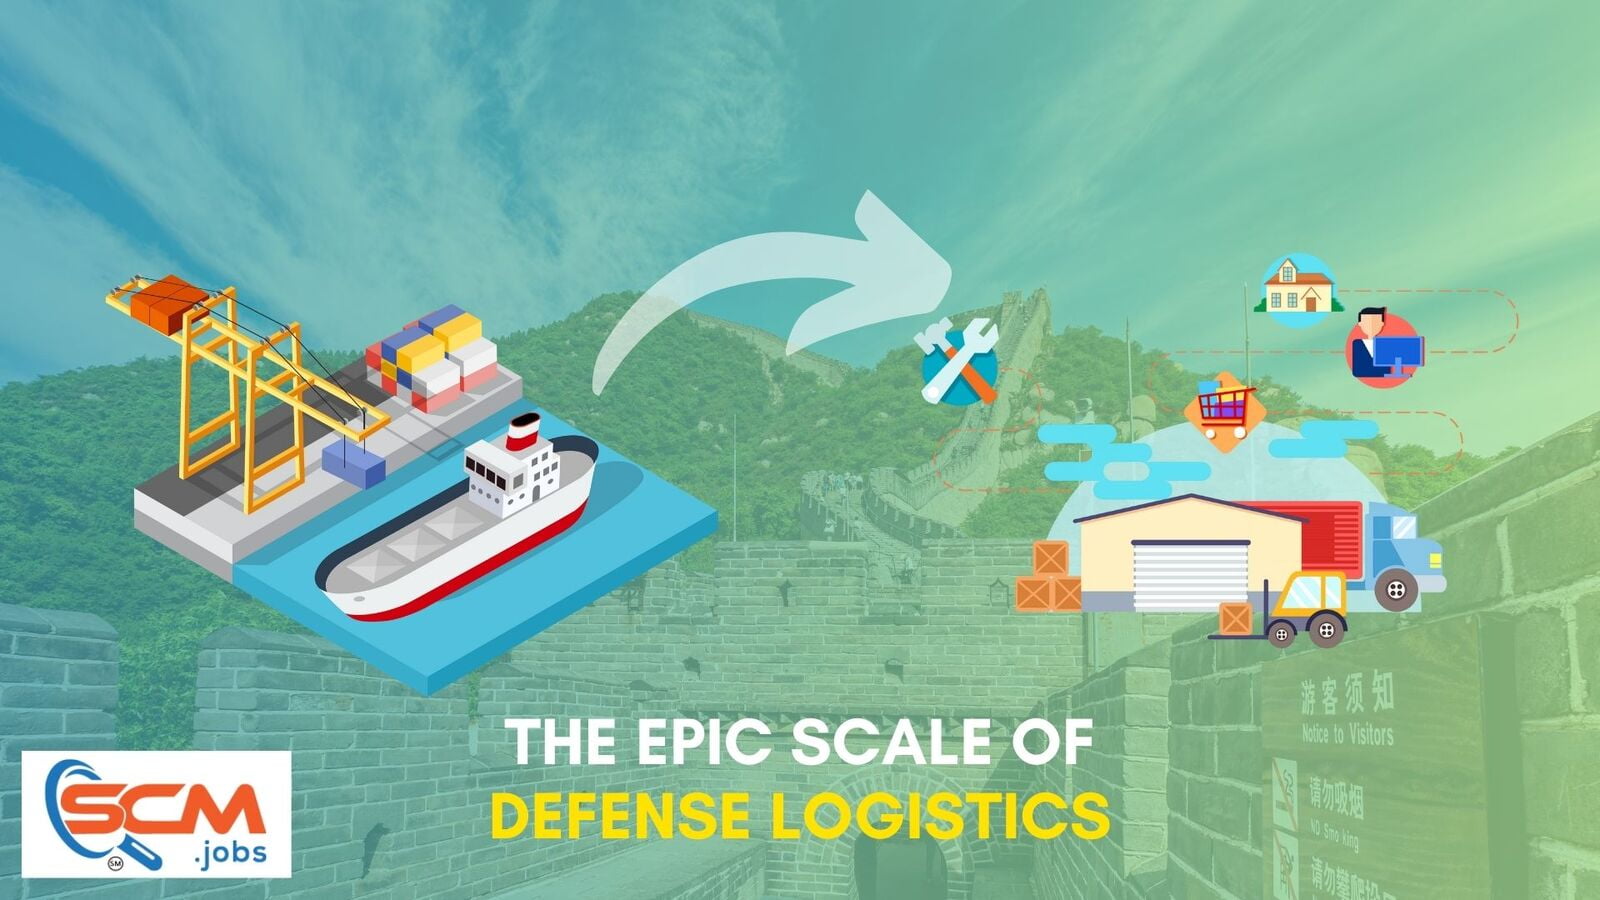 Moving Mountains: The Epic Scale of Defense Logistics